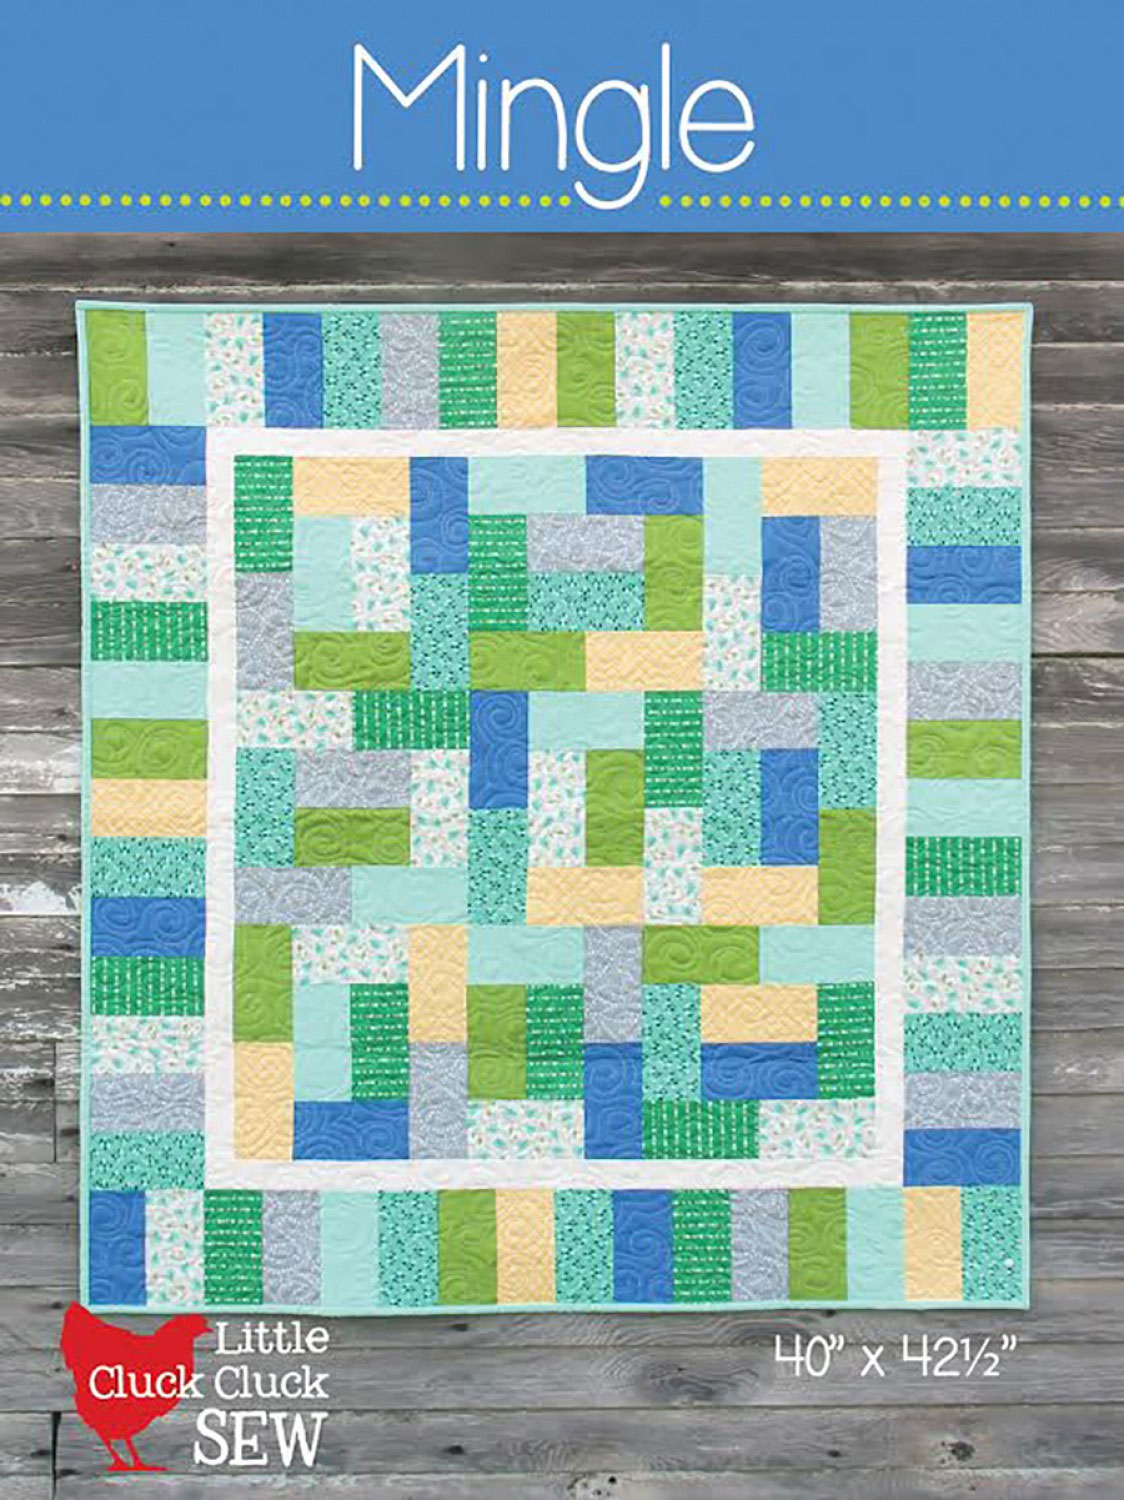 Mingle-quilt-sewing-pattern-Cluck-Cluck-Sew-front